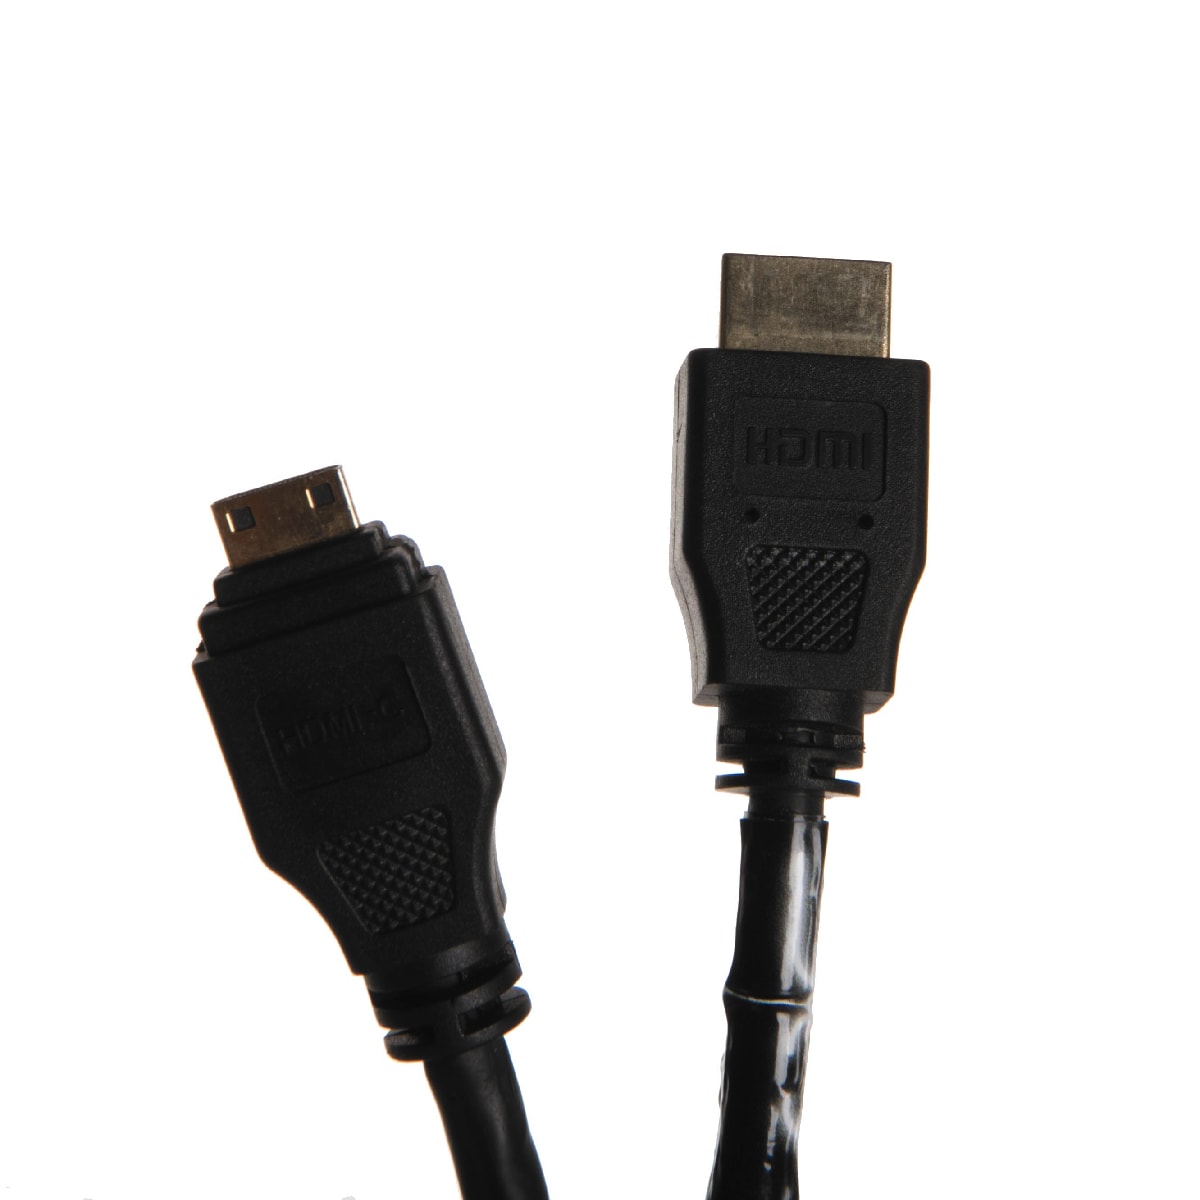  HDMI cable (small to normal plug, 5m)